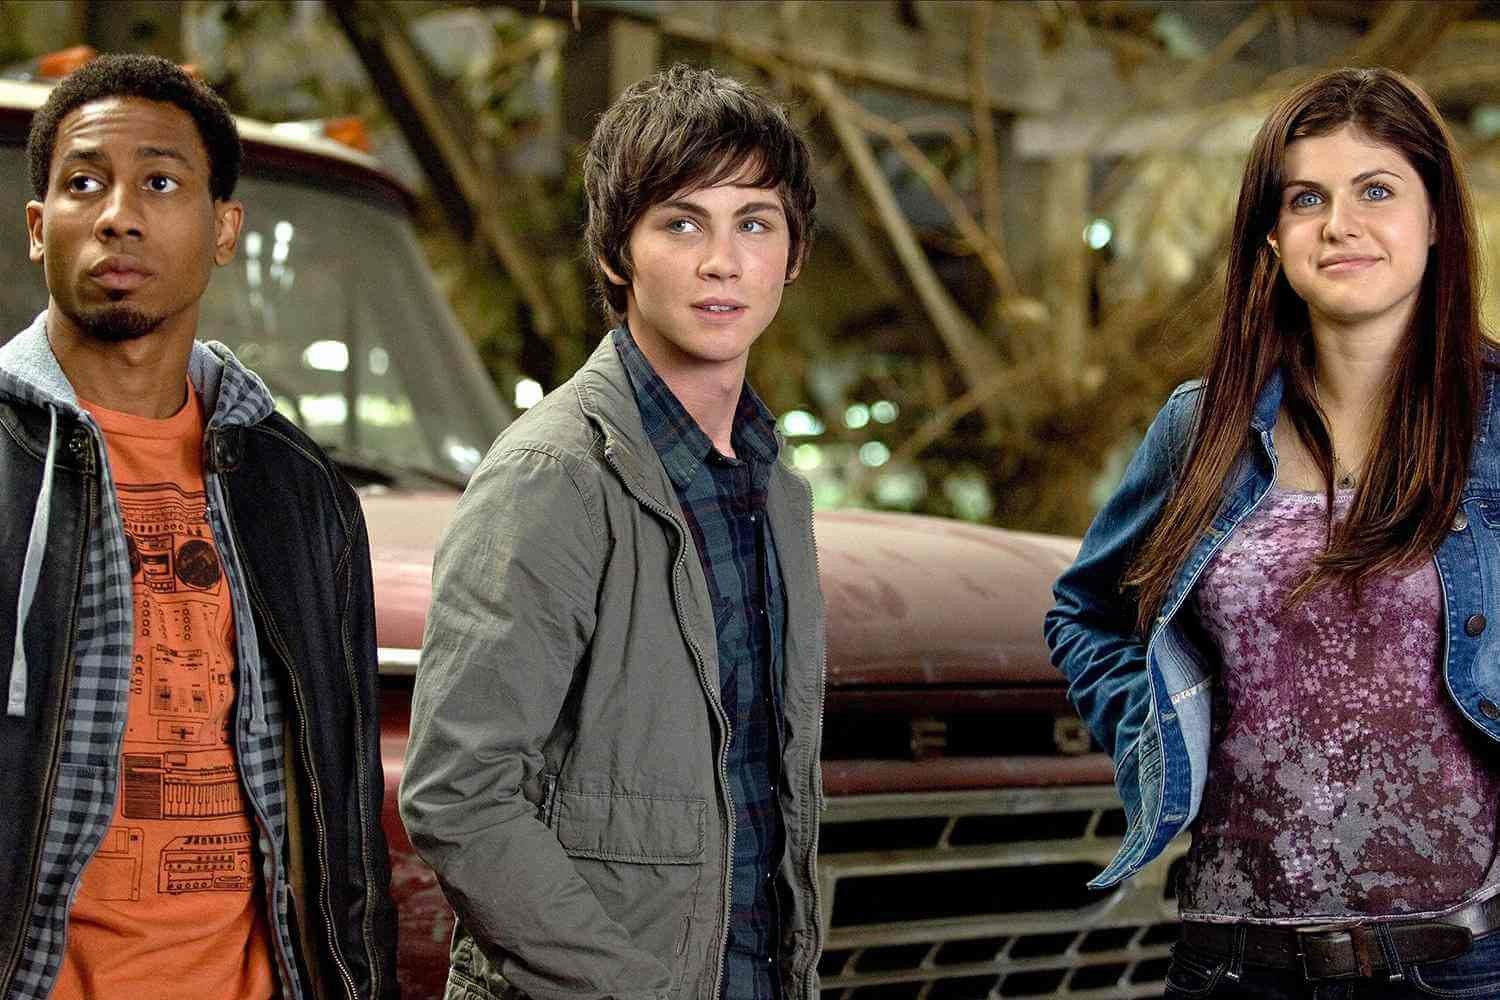 A still from the Percy Jackson film series